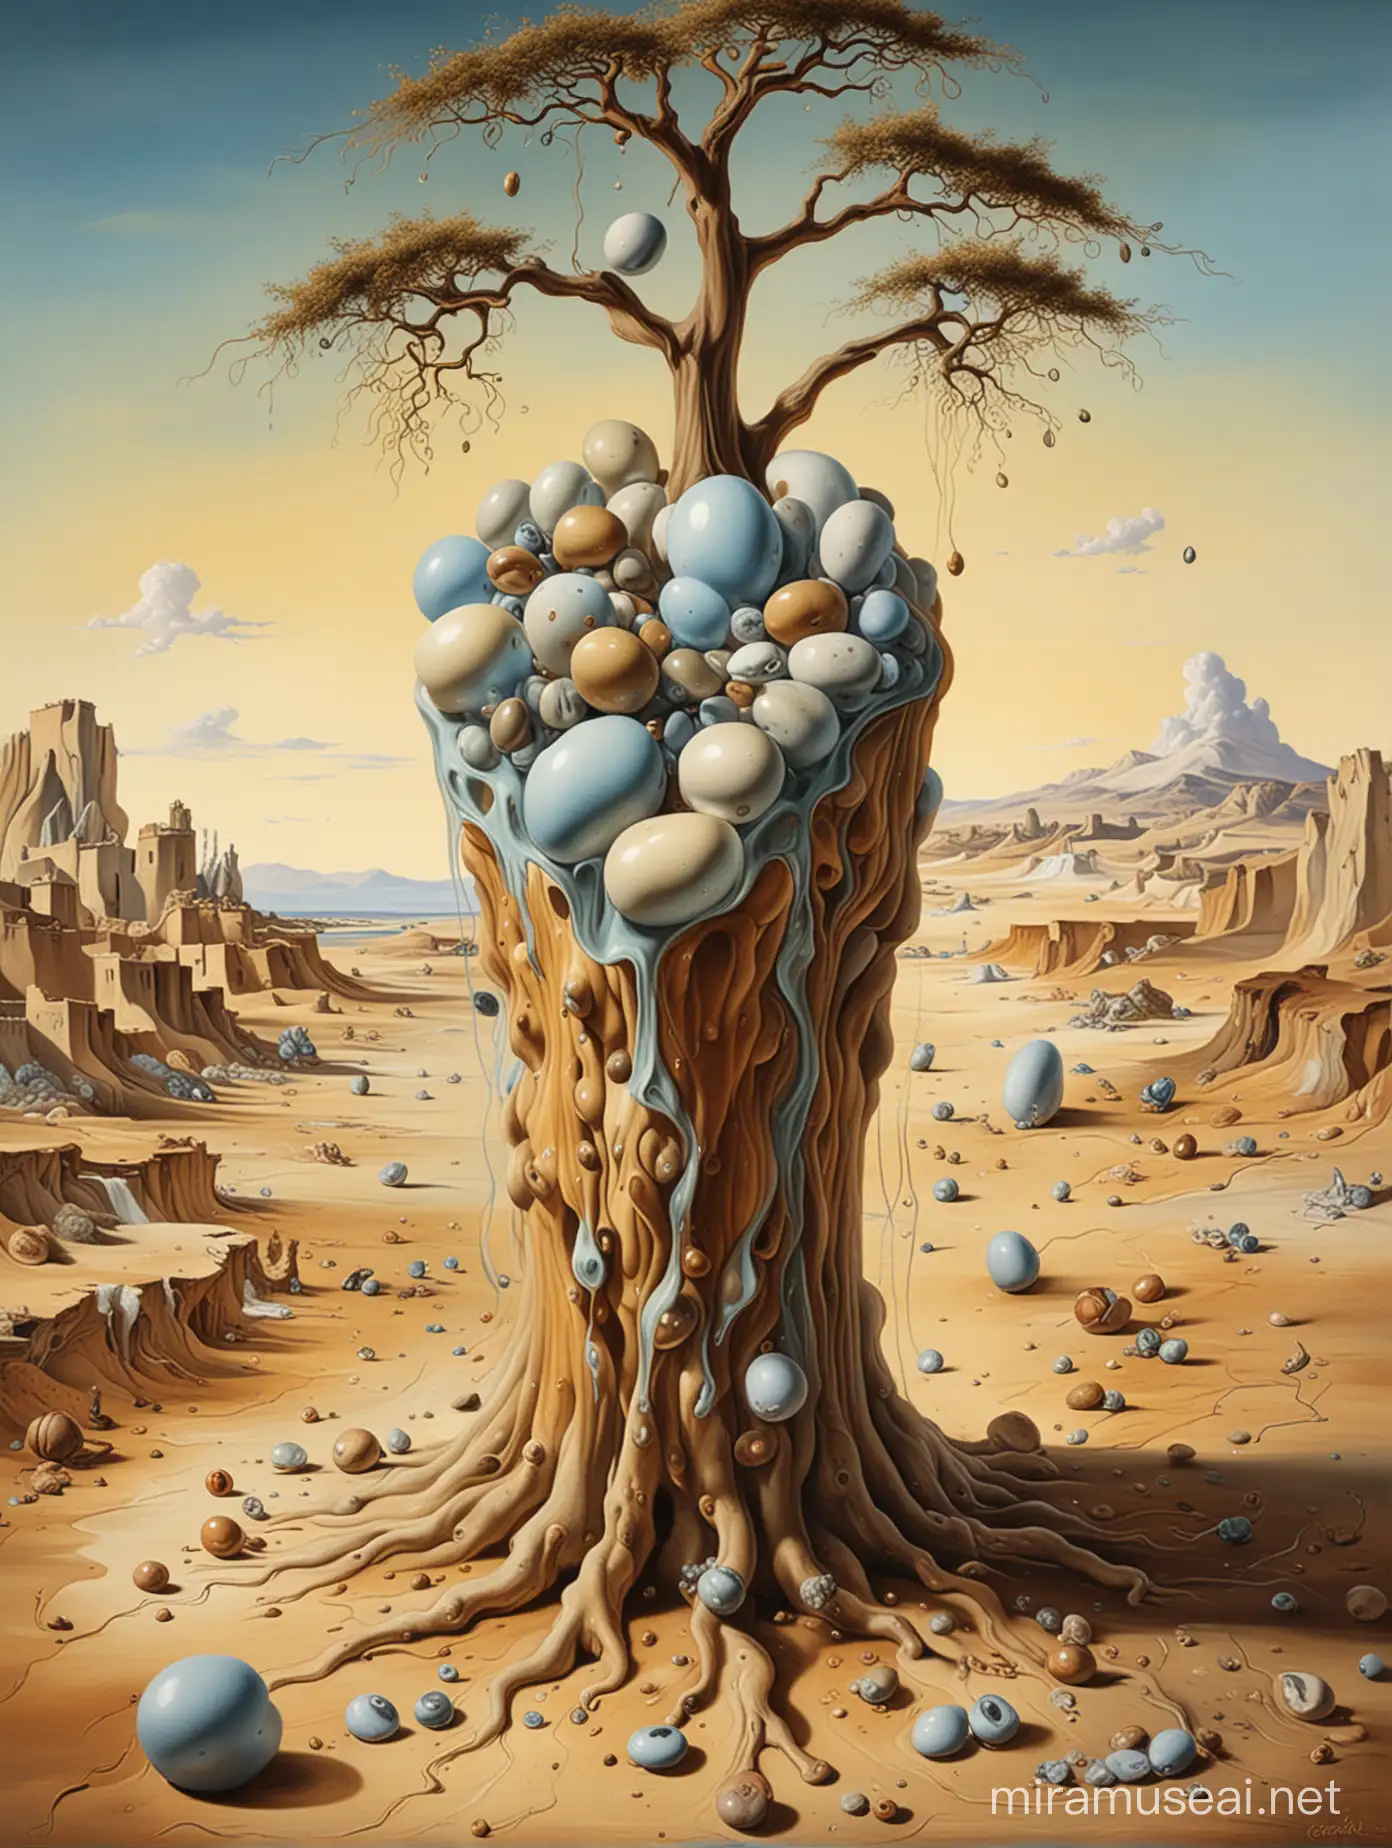 Fantastical DaliInspired Creature Balancing on Desert Tree Trunk in Muted Pastel Hues